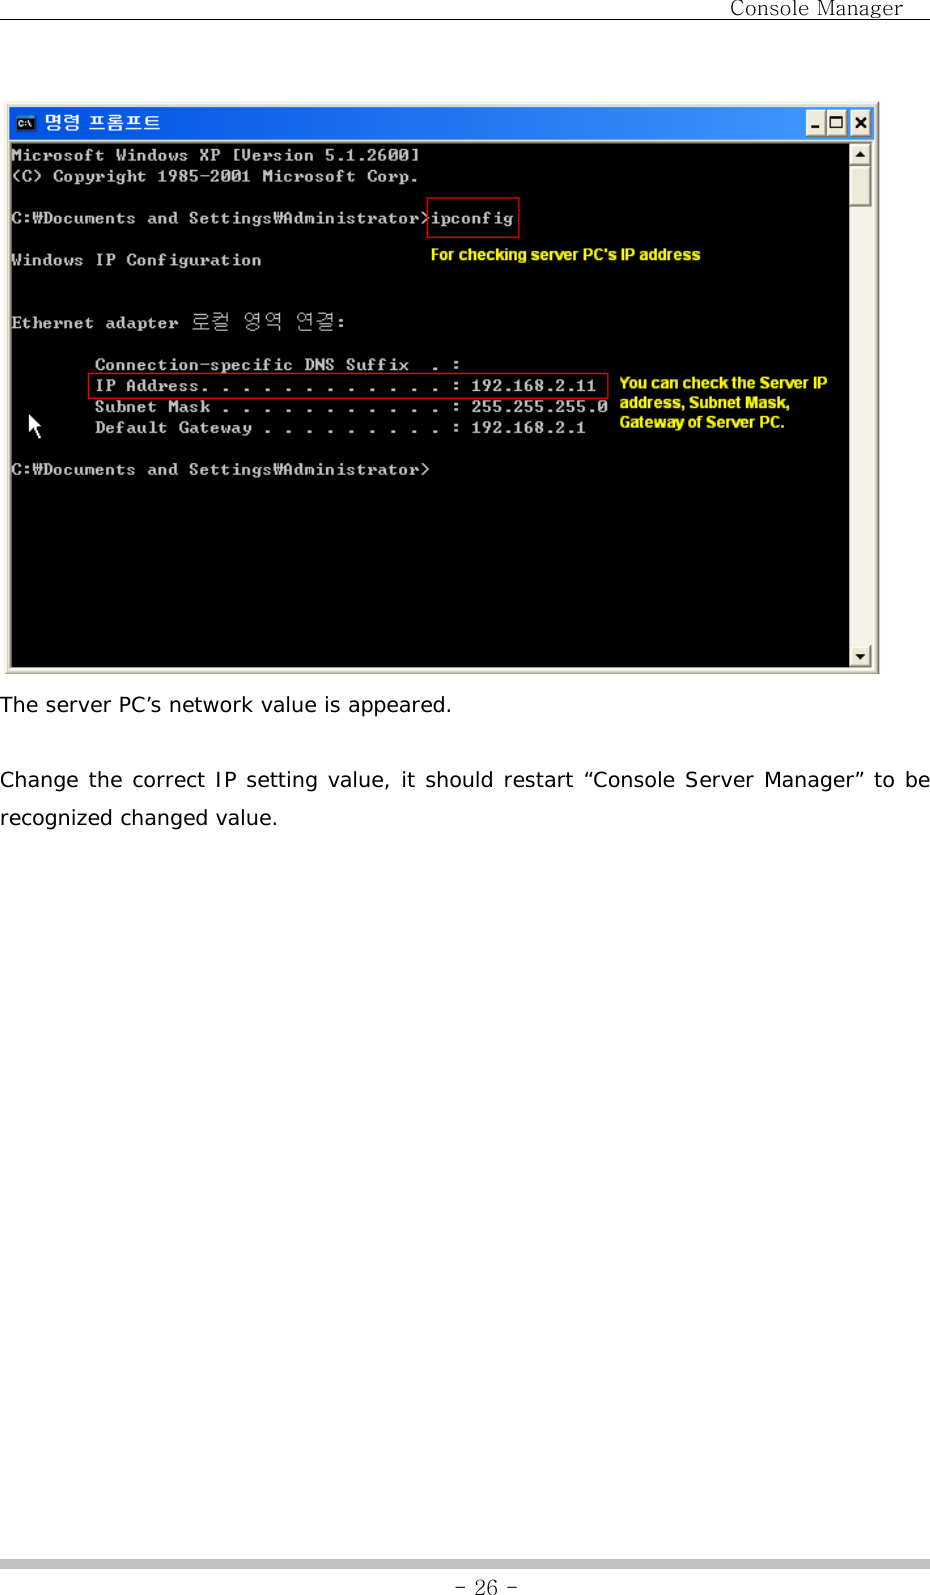                                Console Manager               - 26 - The server PC’s network value is appeared.  Change the correct IP setting value, it should restart “Console Server Manager” to be recognized changed value. 